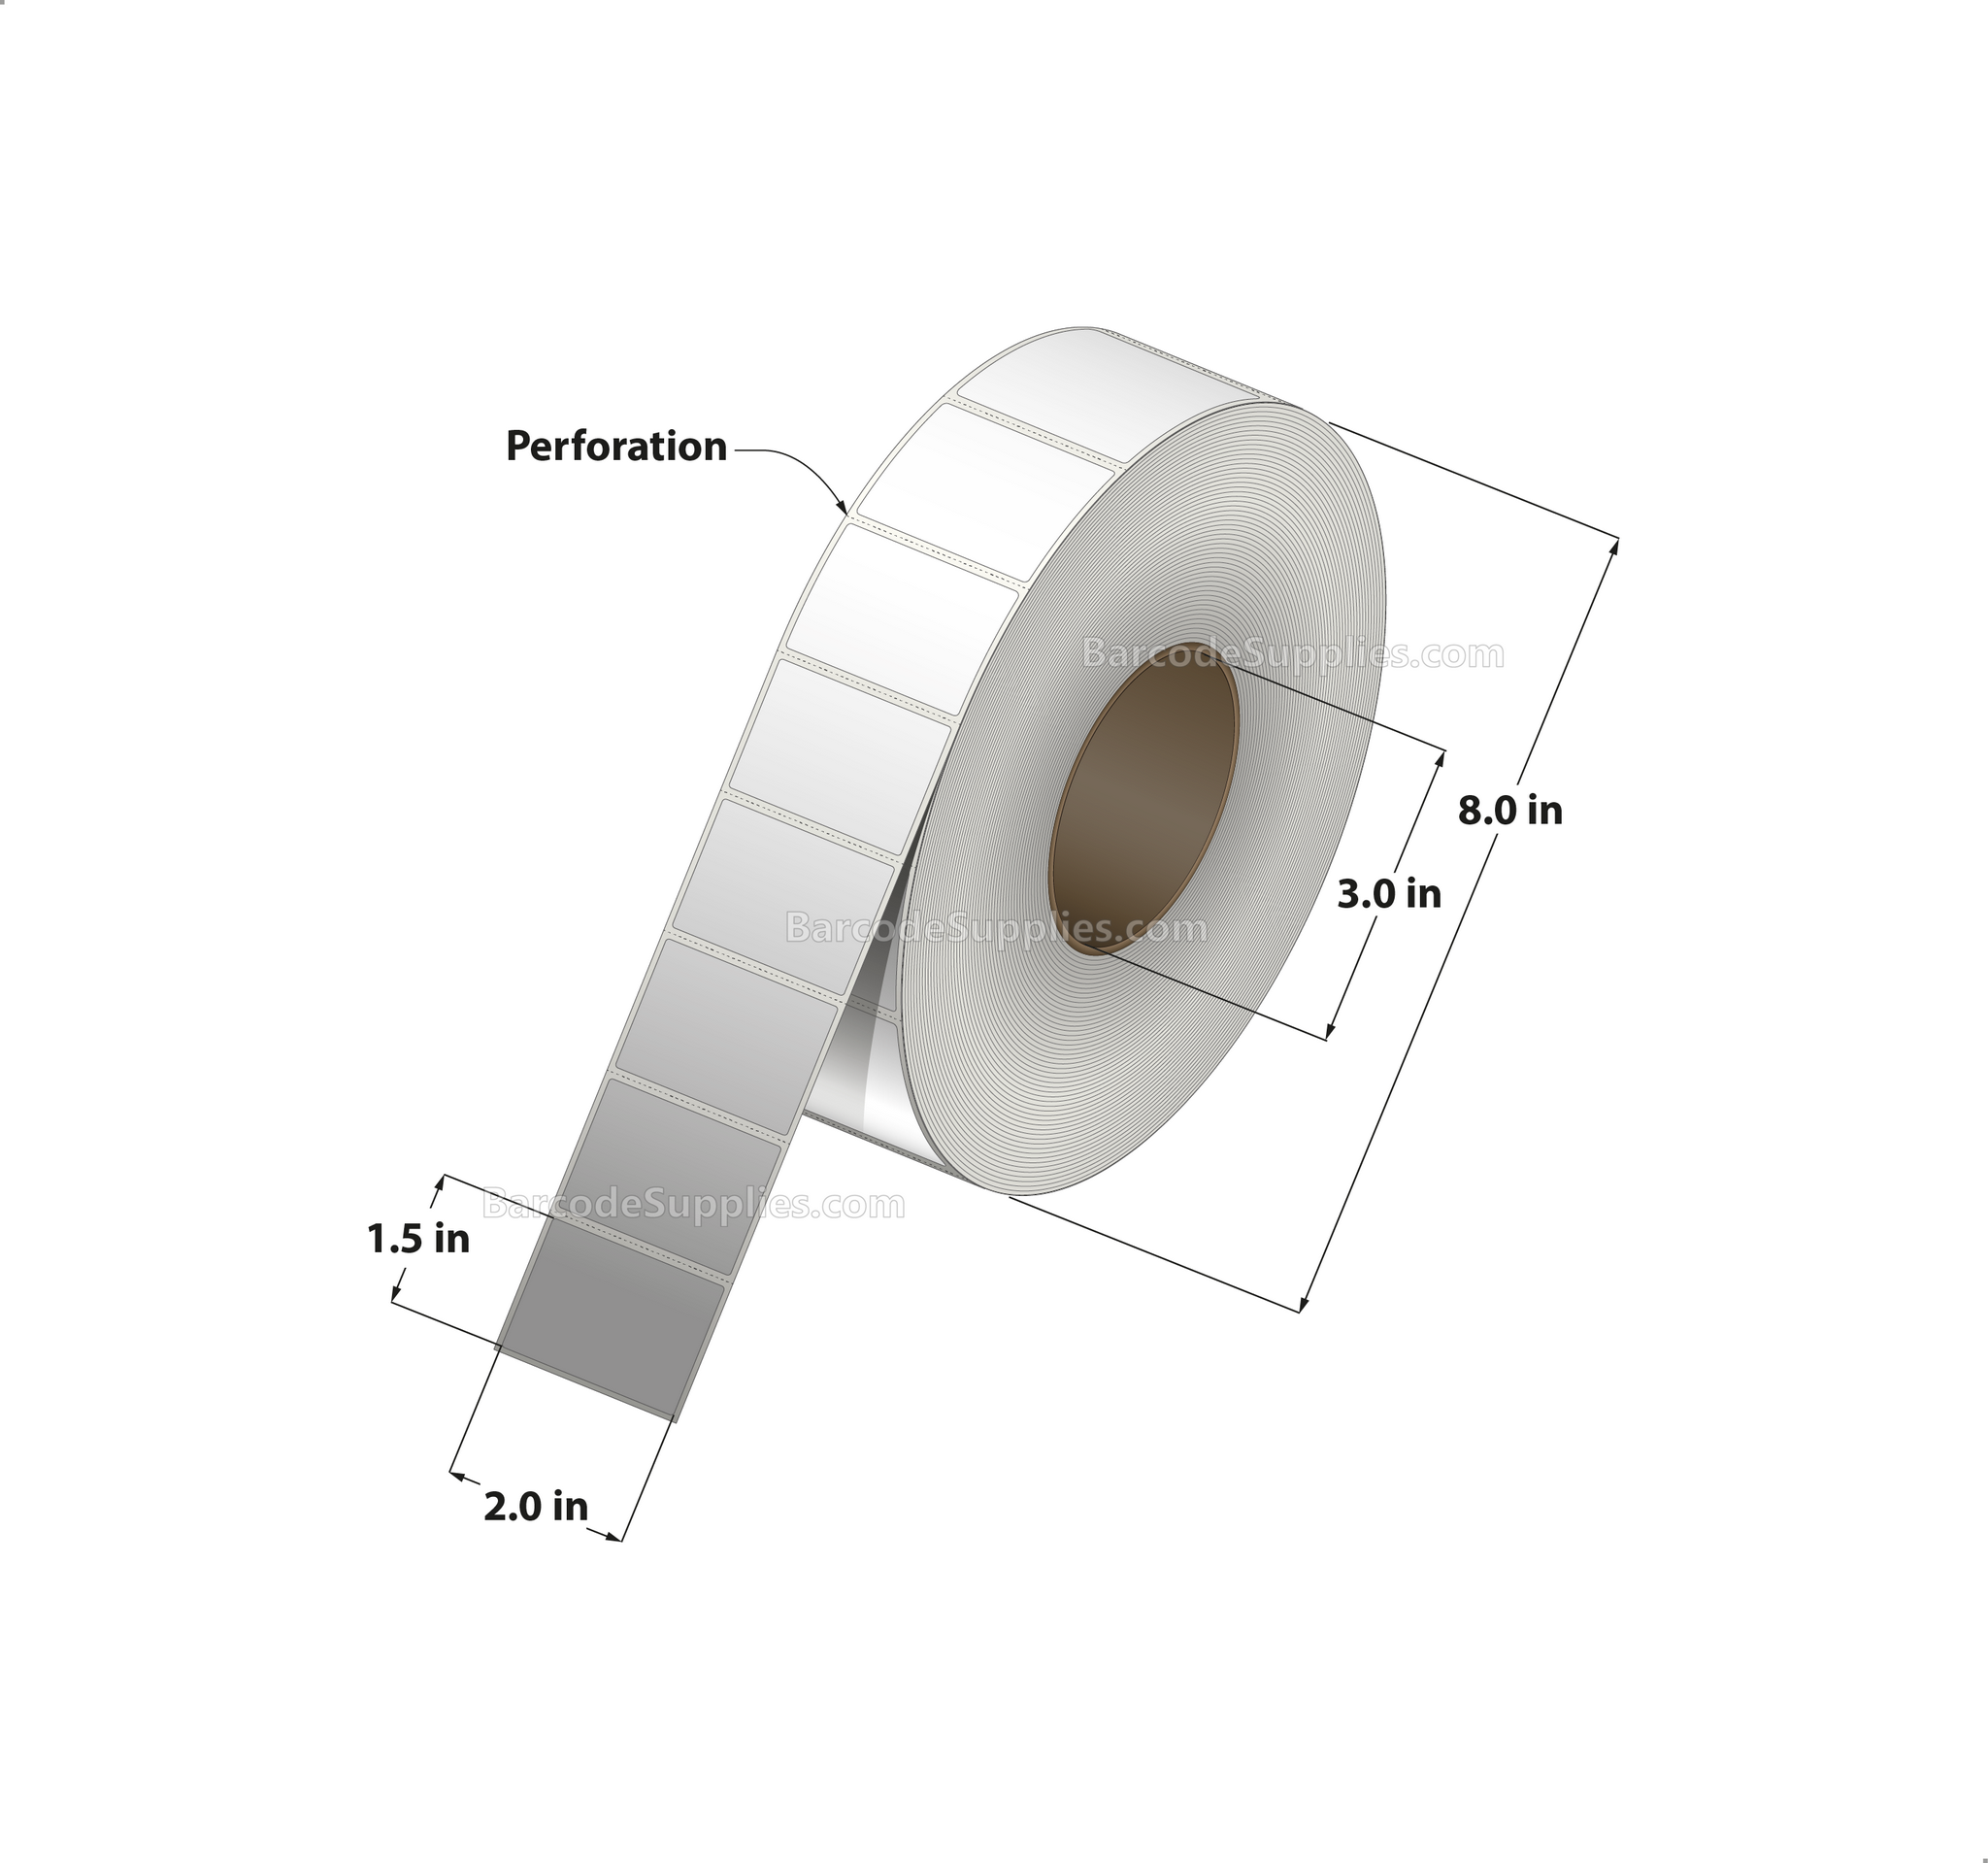 2 x 1.5 Thermal Transfer White Labels With Permanent Acrylic Adhesive - Perforated - 3800 Labels Per Roll - Carton Of 8 Rolls - 30400 Labels Total - MPN: TH215-1P